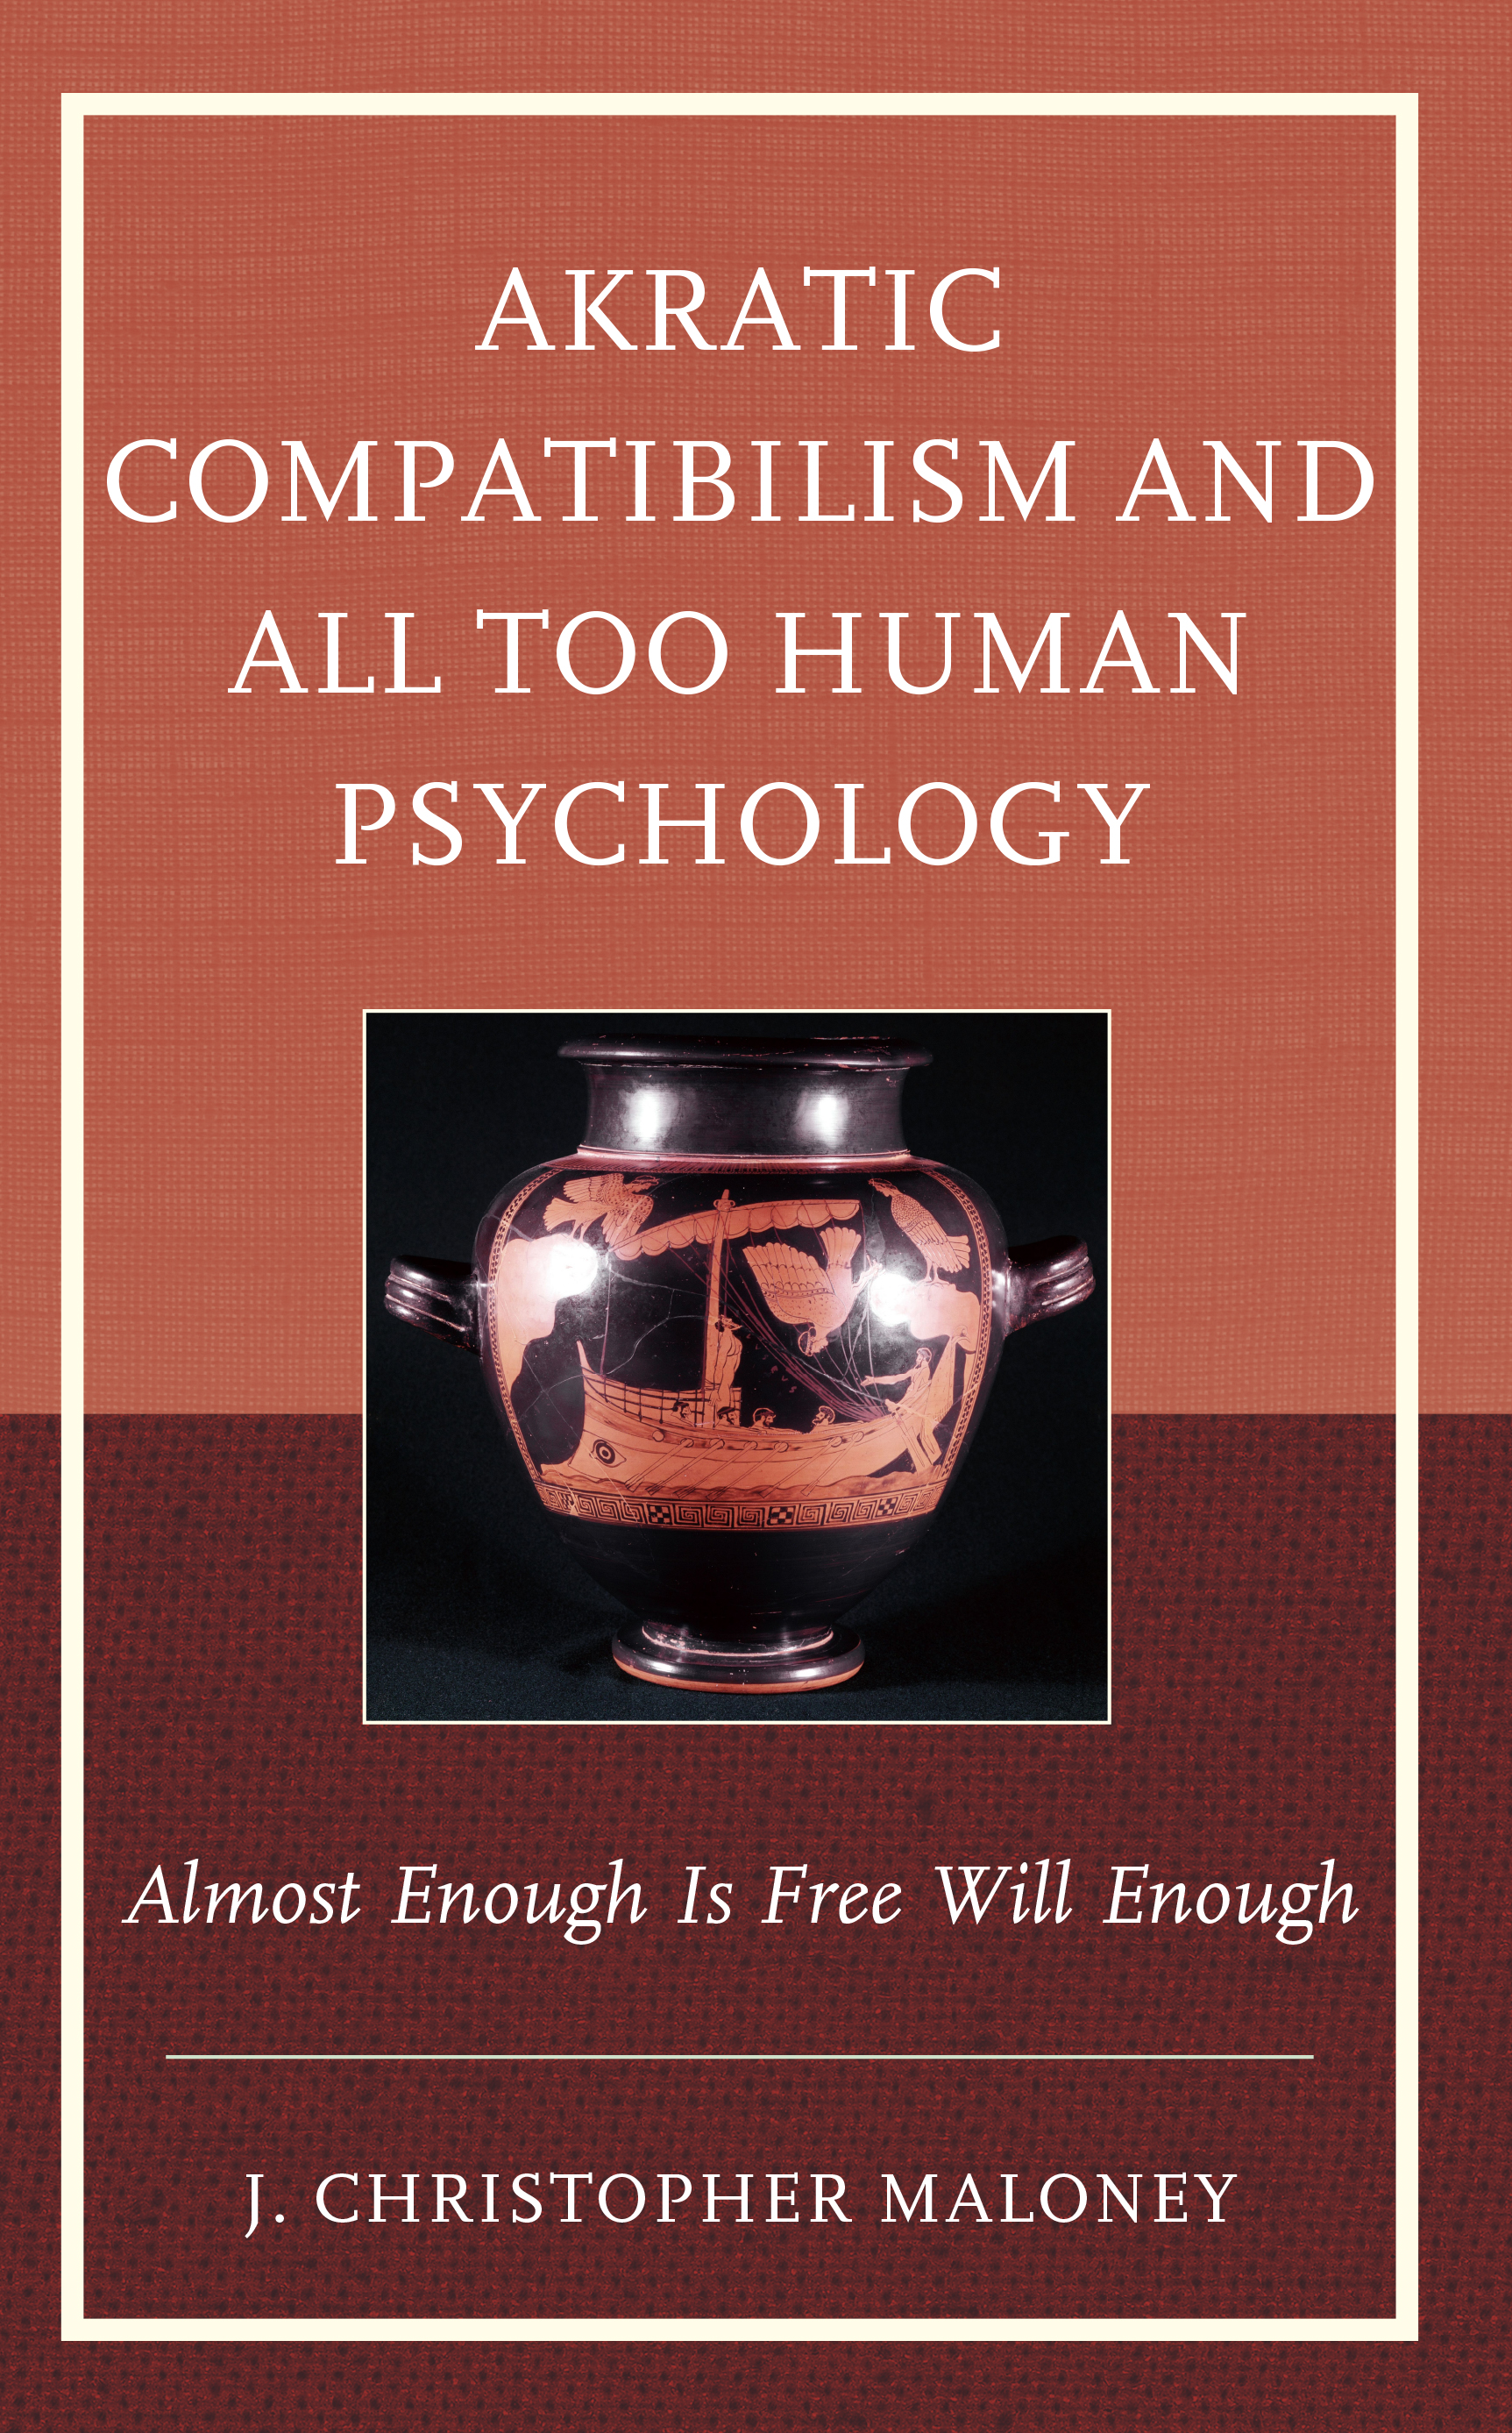 Akratic Compatibilism and All Too Human Psychology: Almost Enough Is Free Will Enough